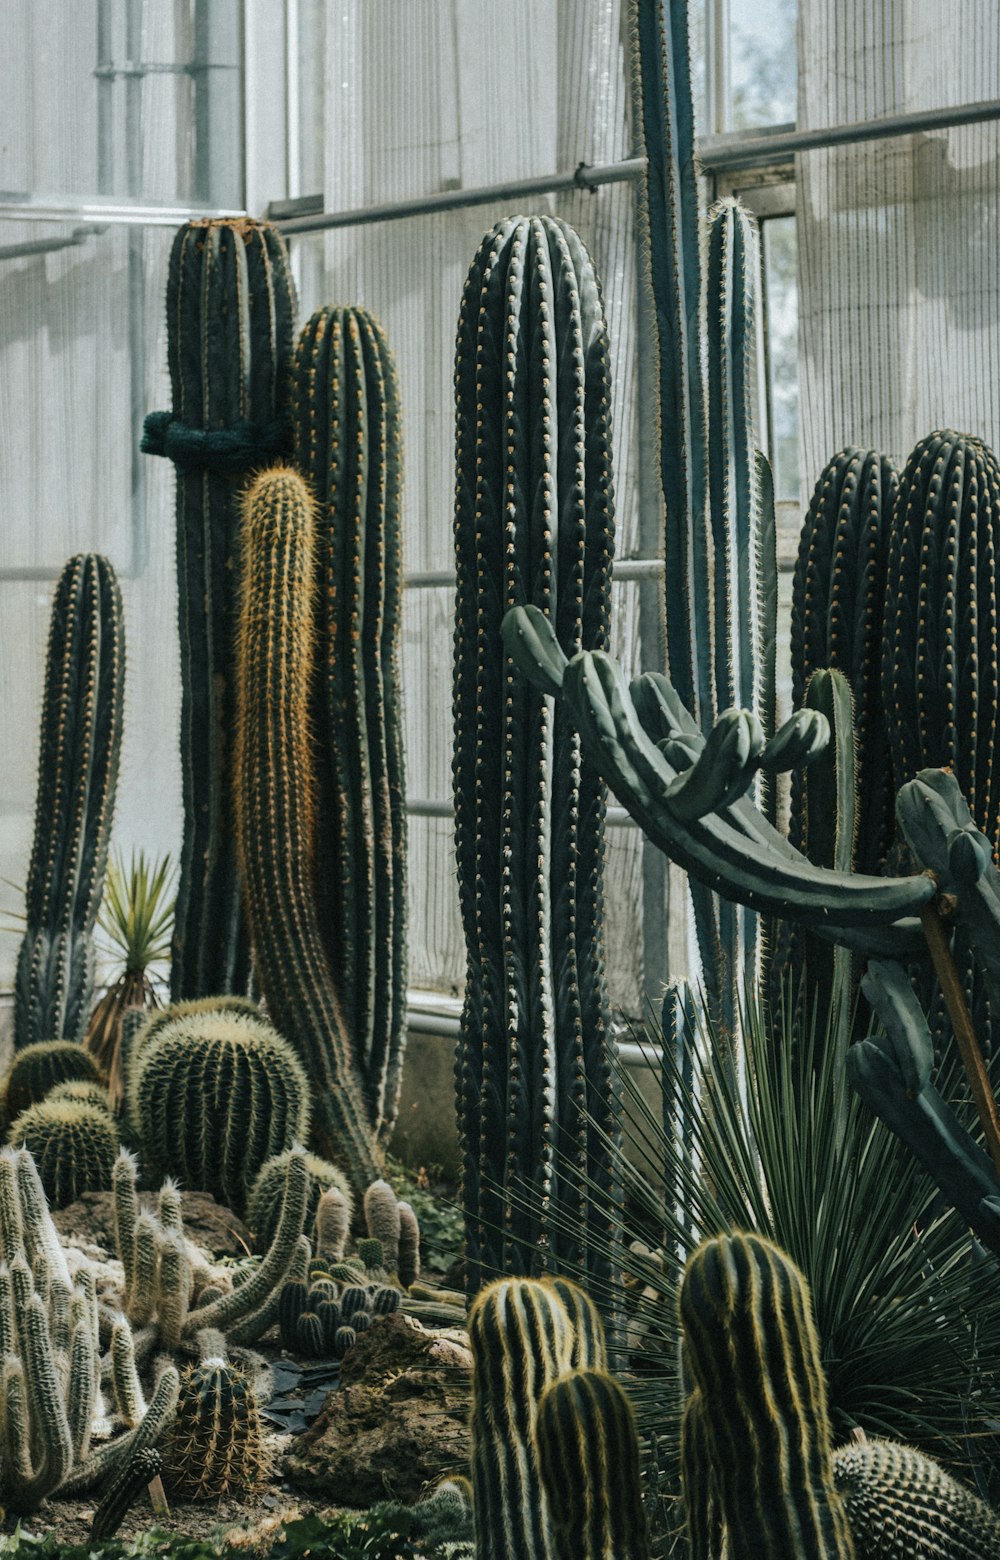 a group of cactus in a room